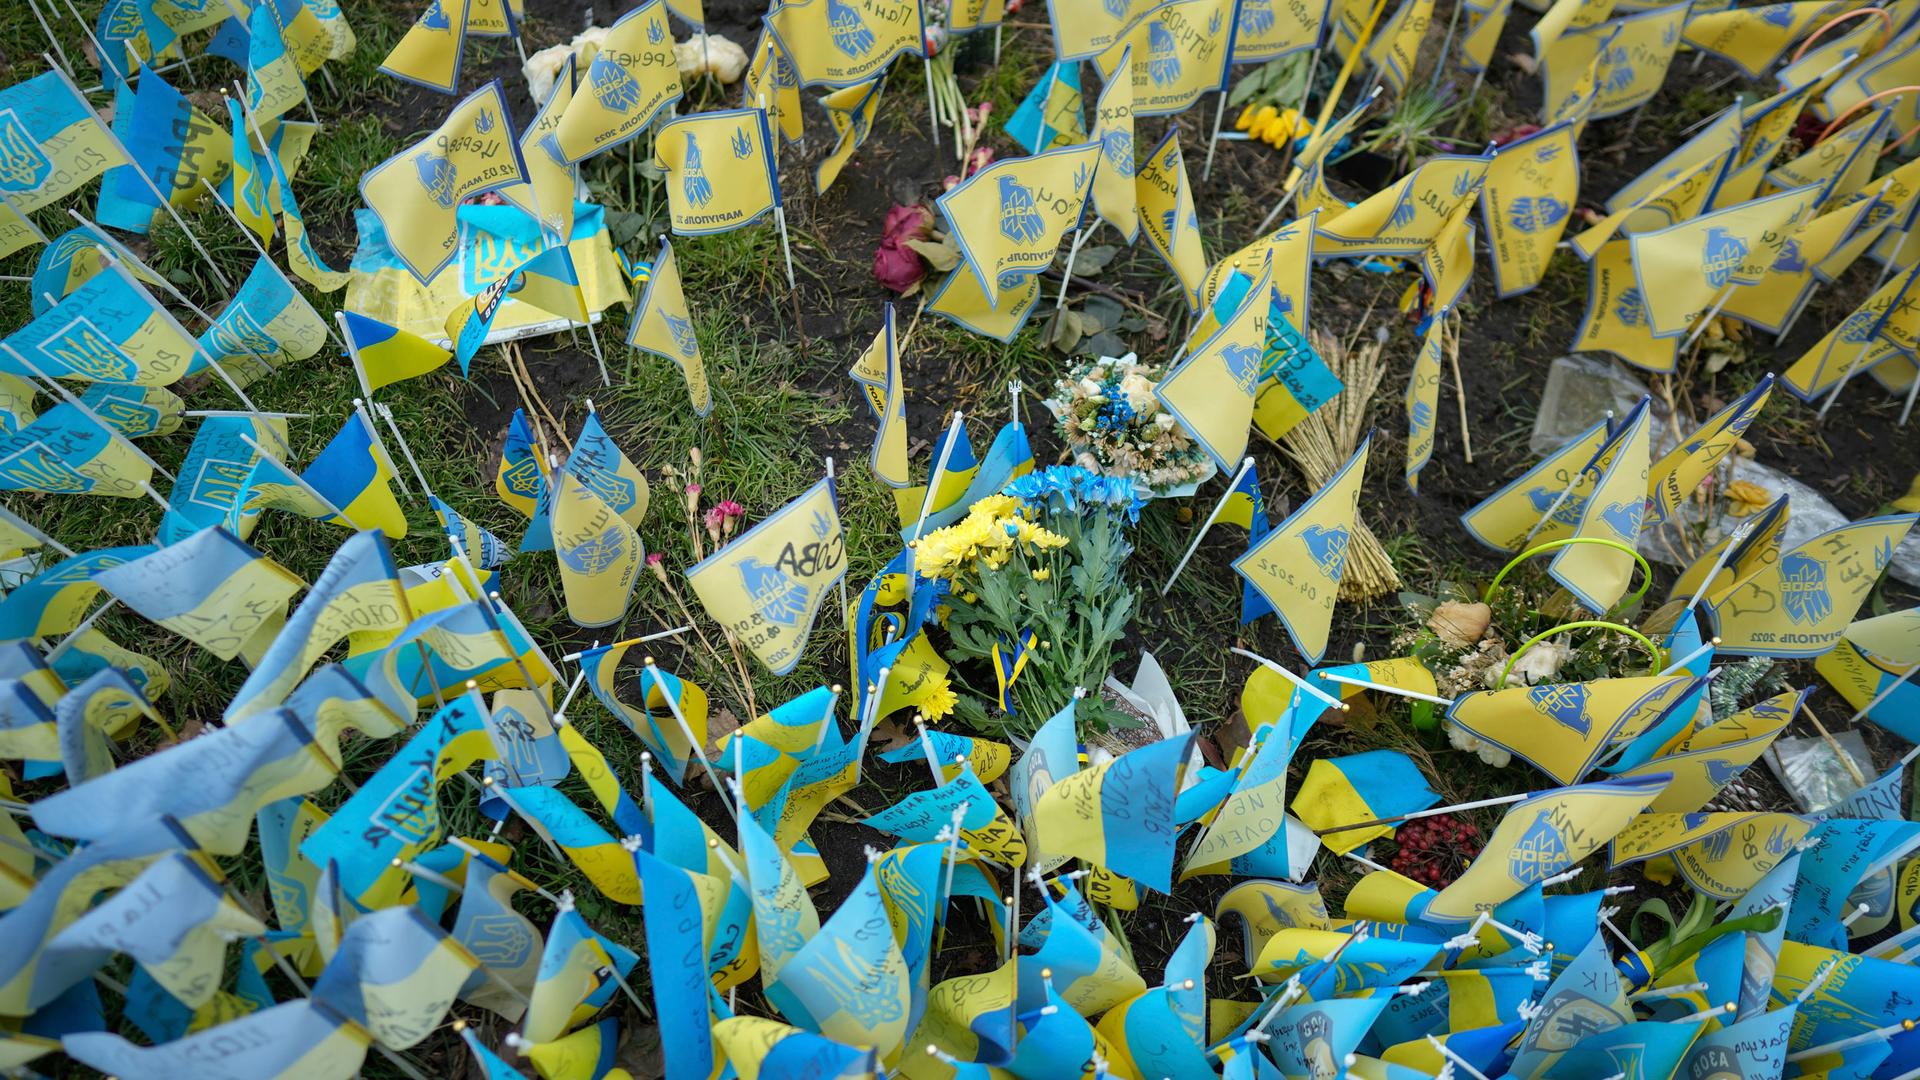 A bunch of flowers with the colors of the Ukrainian flag is laid down at the memorial for those killed during the war, near Maidan Square in central Kyiv, Ukraine, Friday, Feb. 24, 2023.